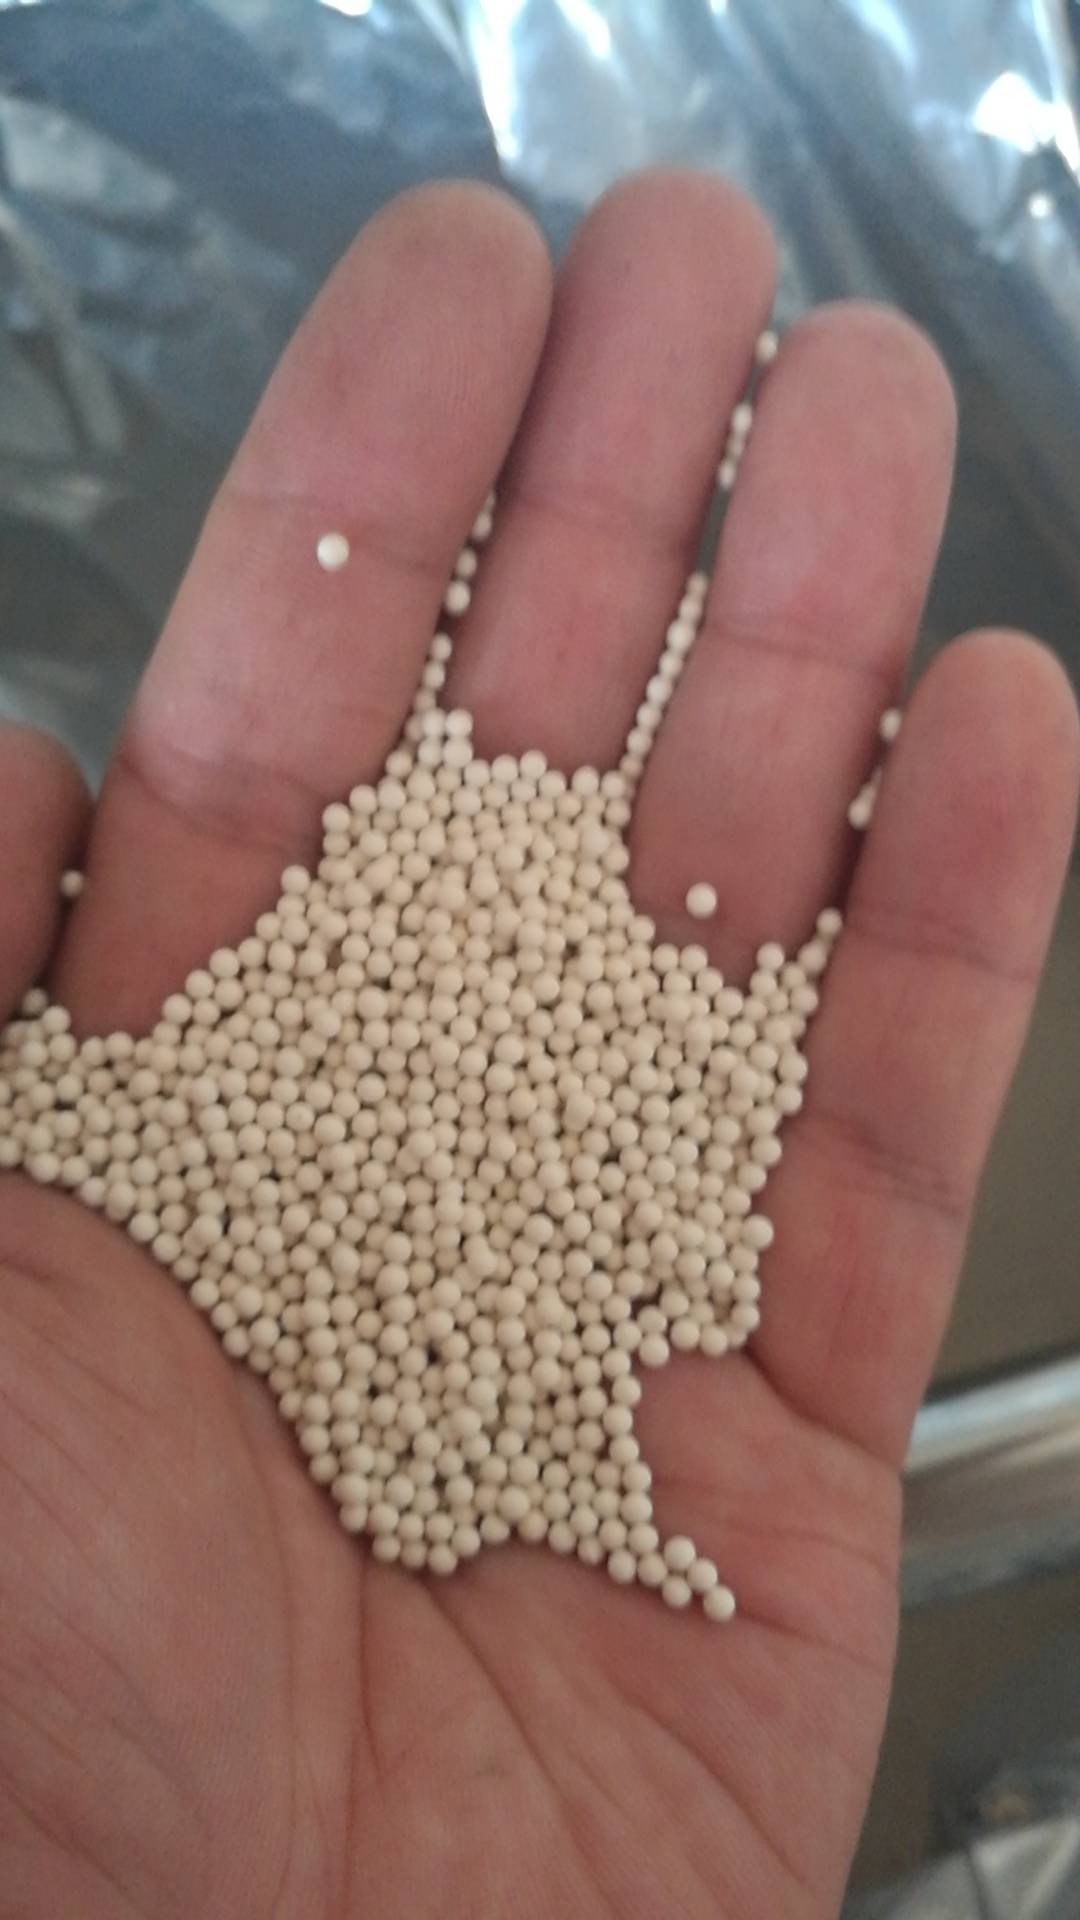 The Newly Purchased France CECA Molecular Sieves Arrived in Cape-Golden Production Base